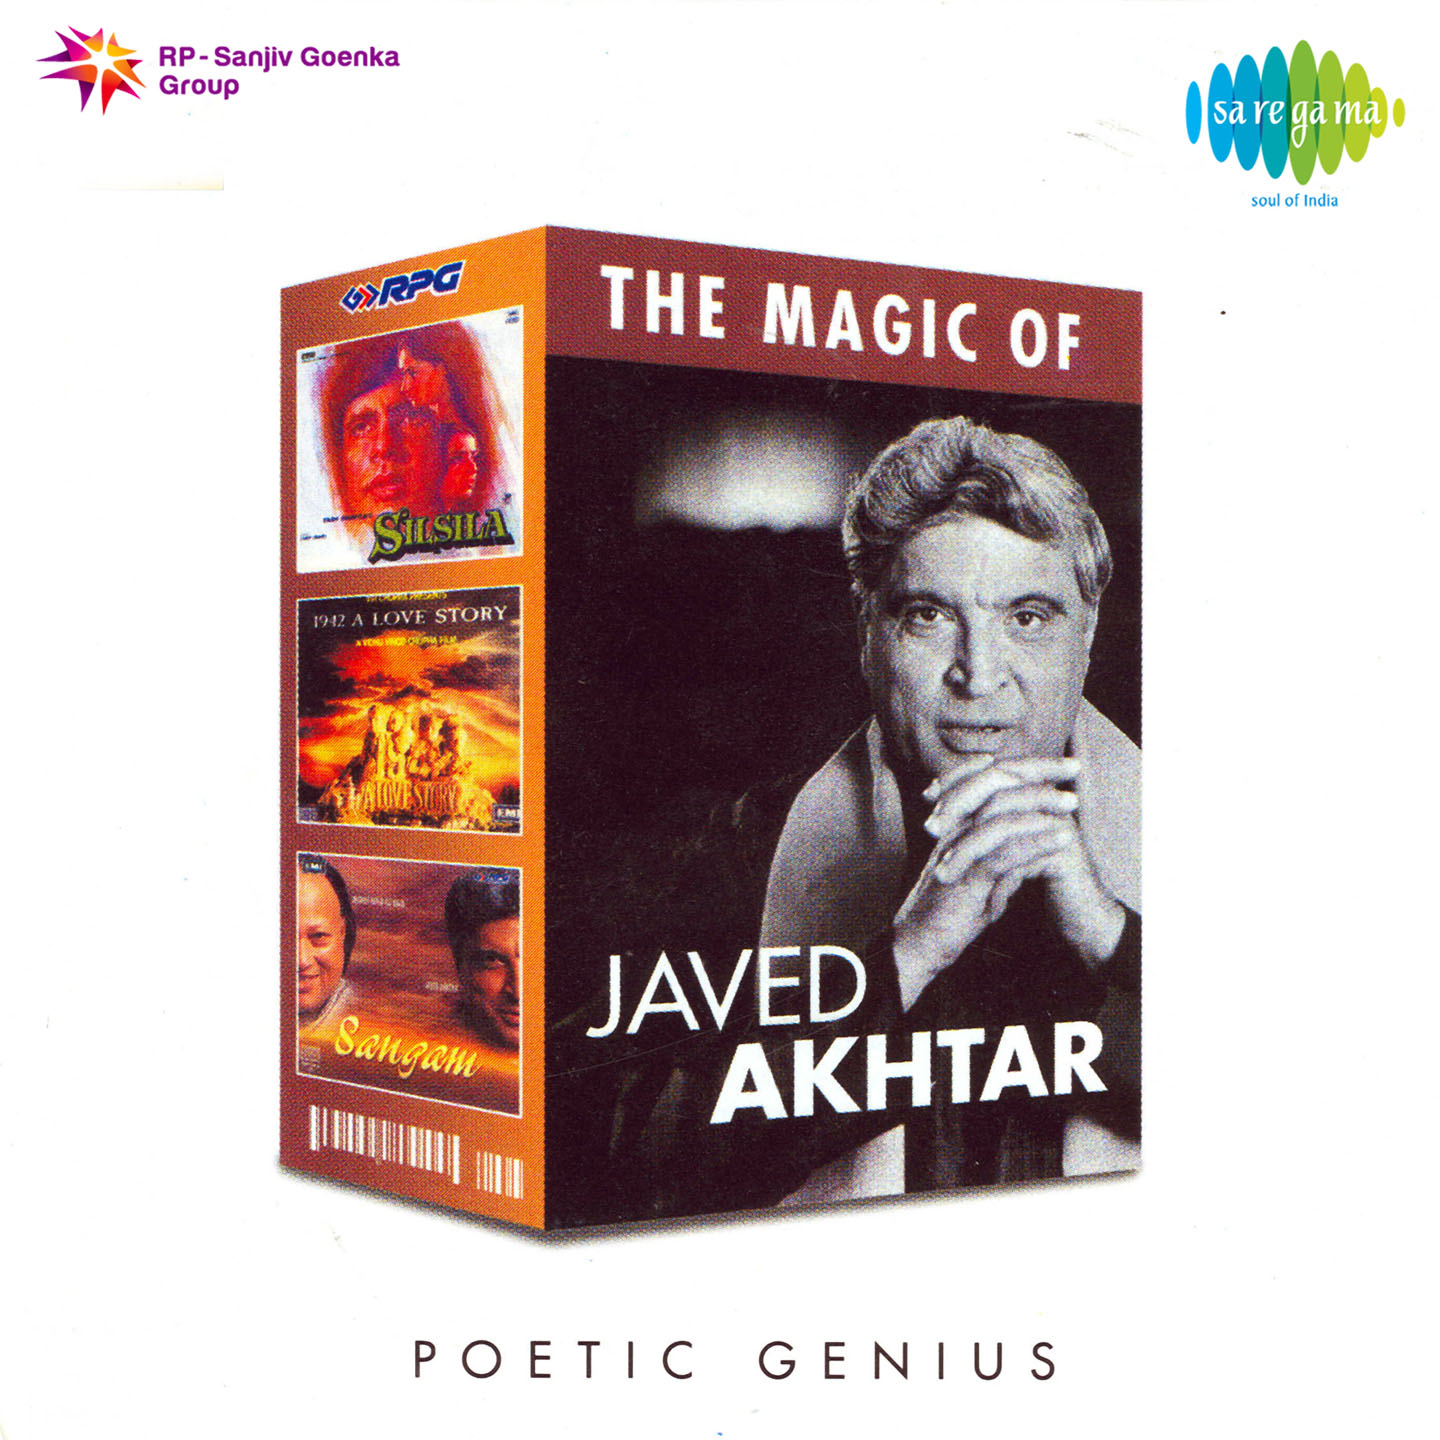 The Magic Of Javed Akhtar